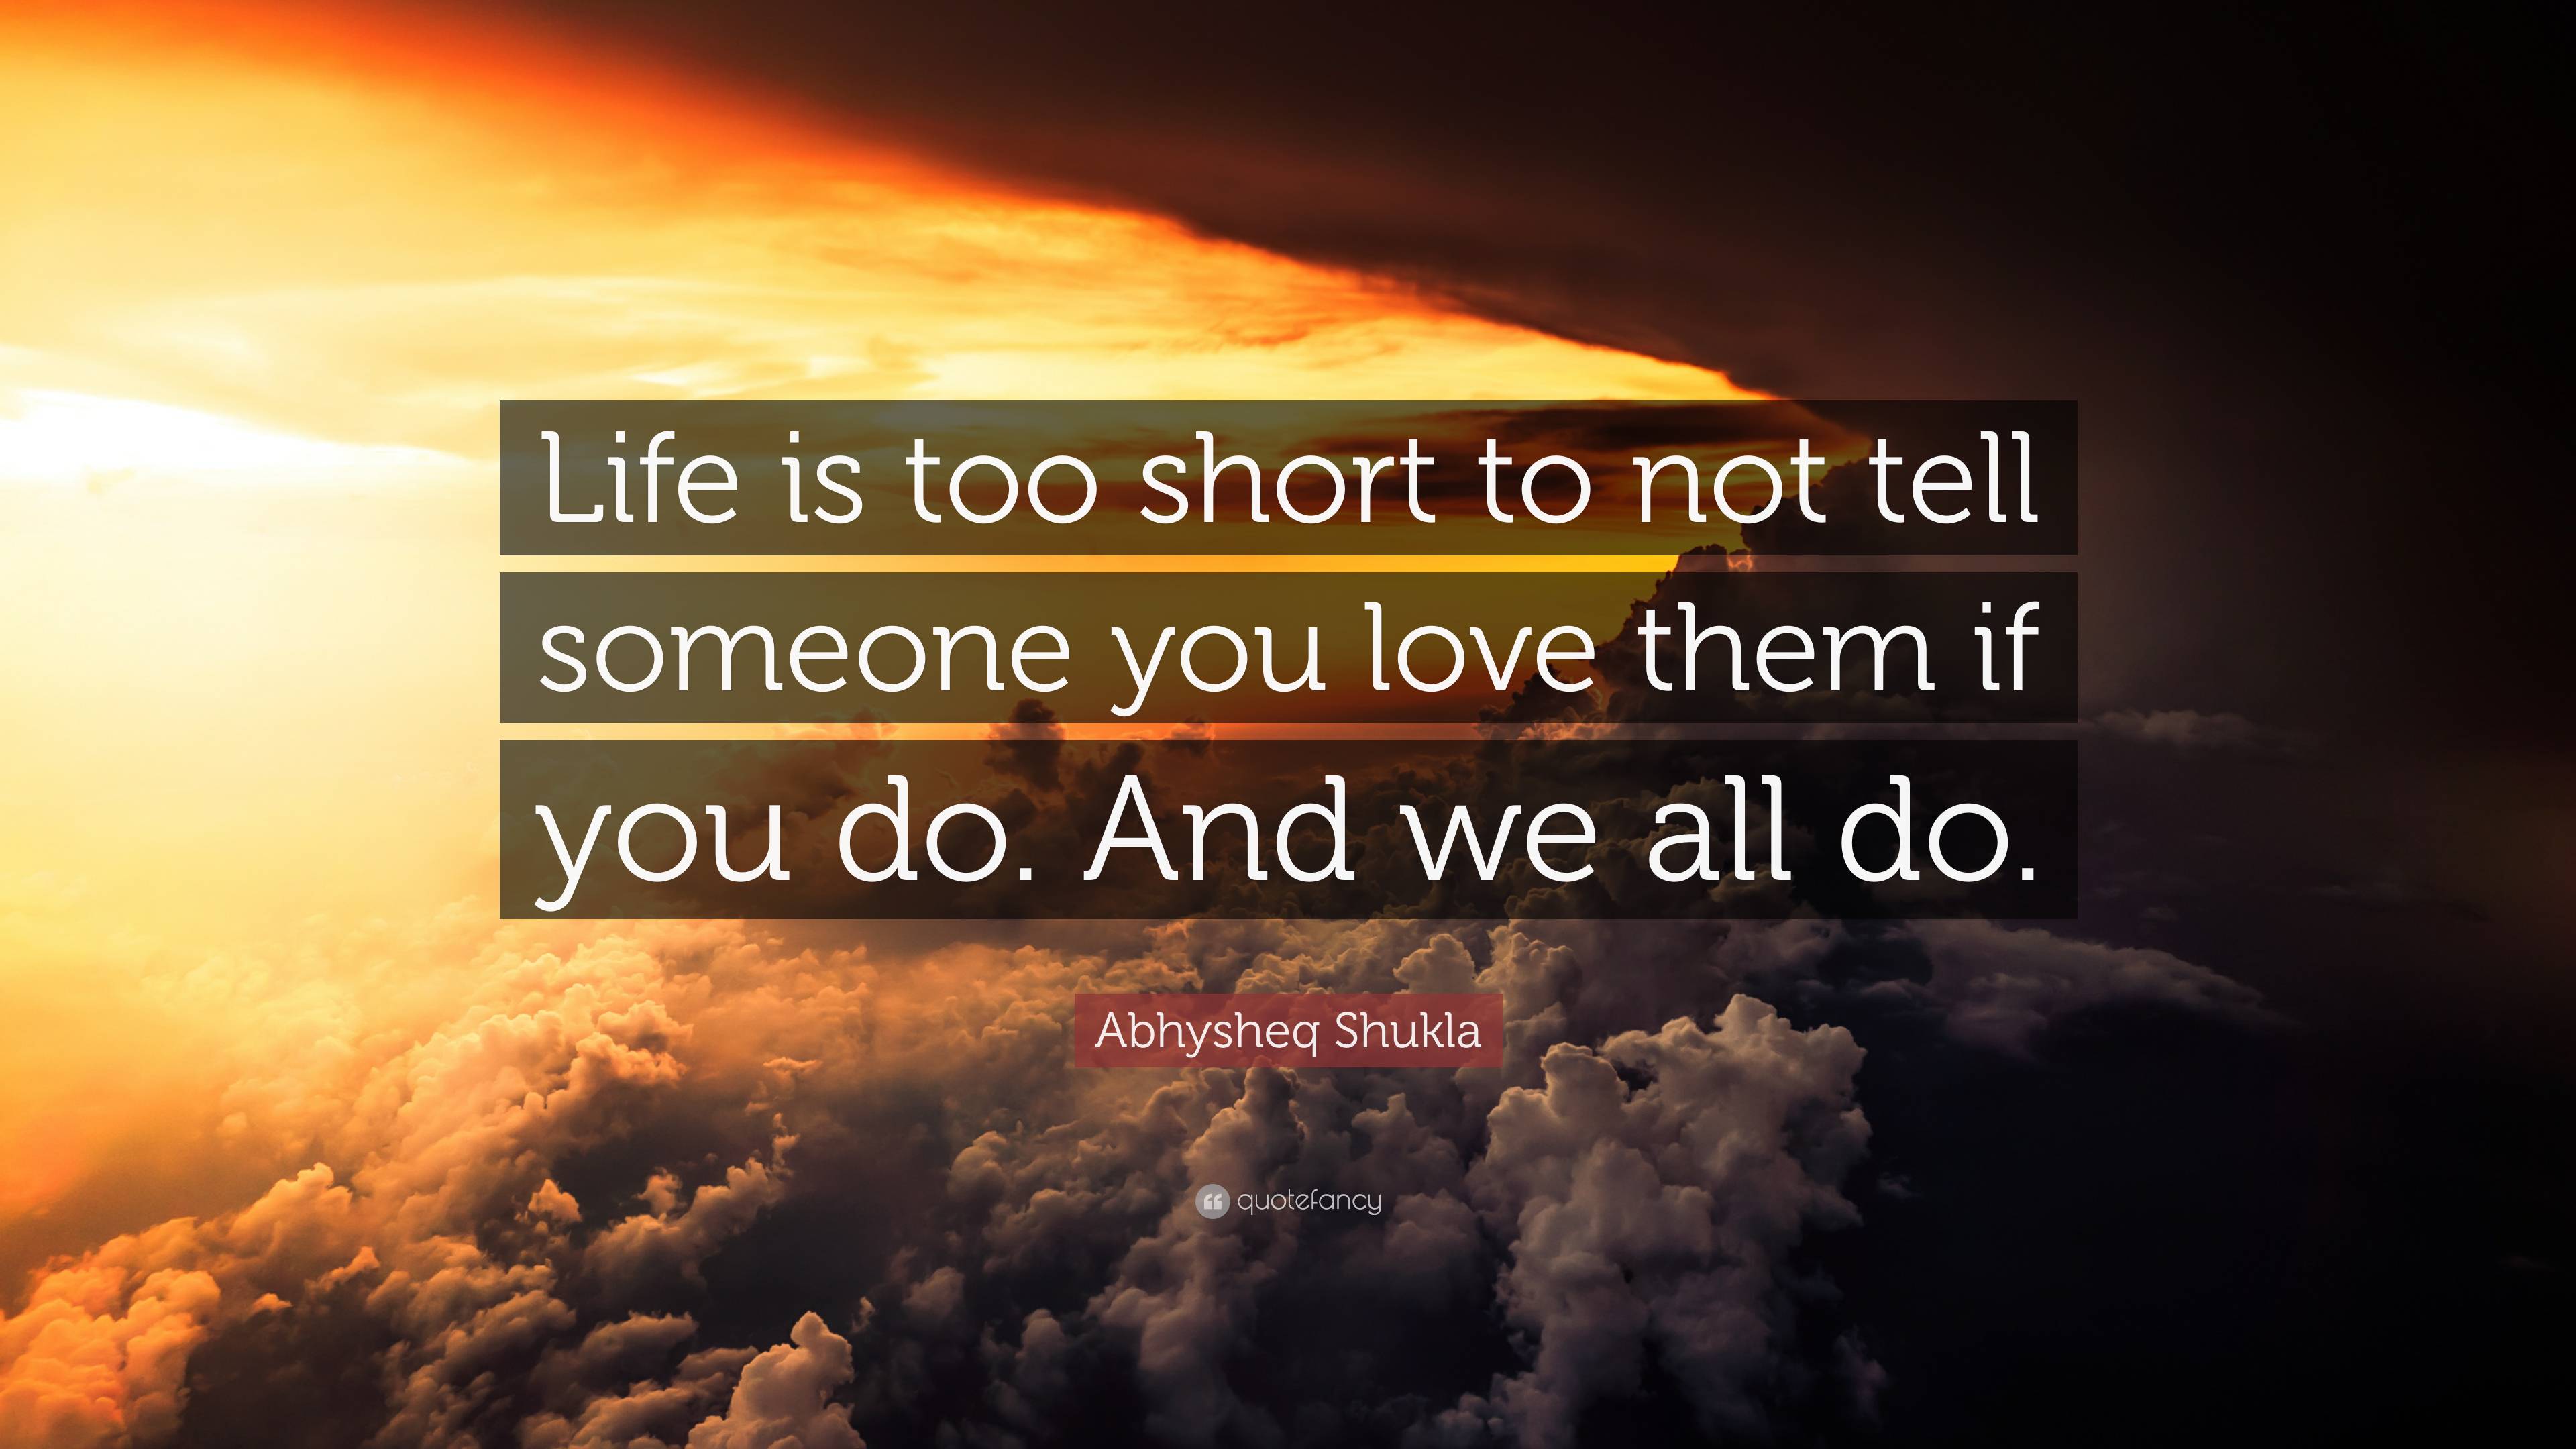 Abhysheq Shukla Quote: “Life is too short to not tell someone you love ...